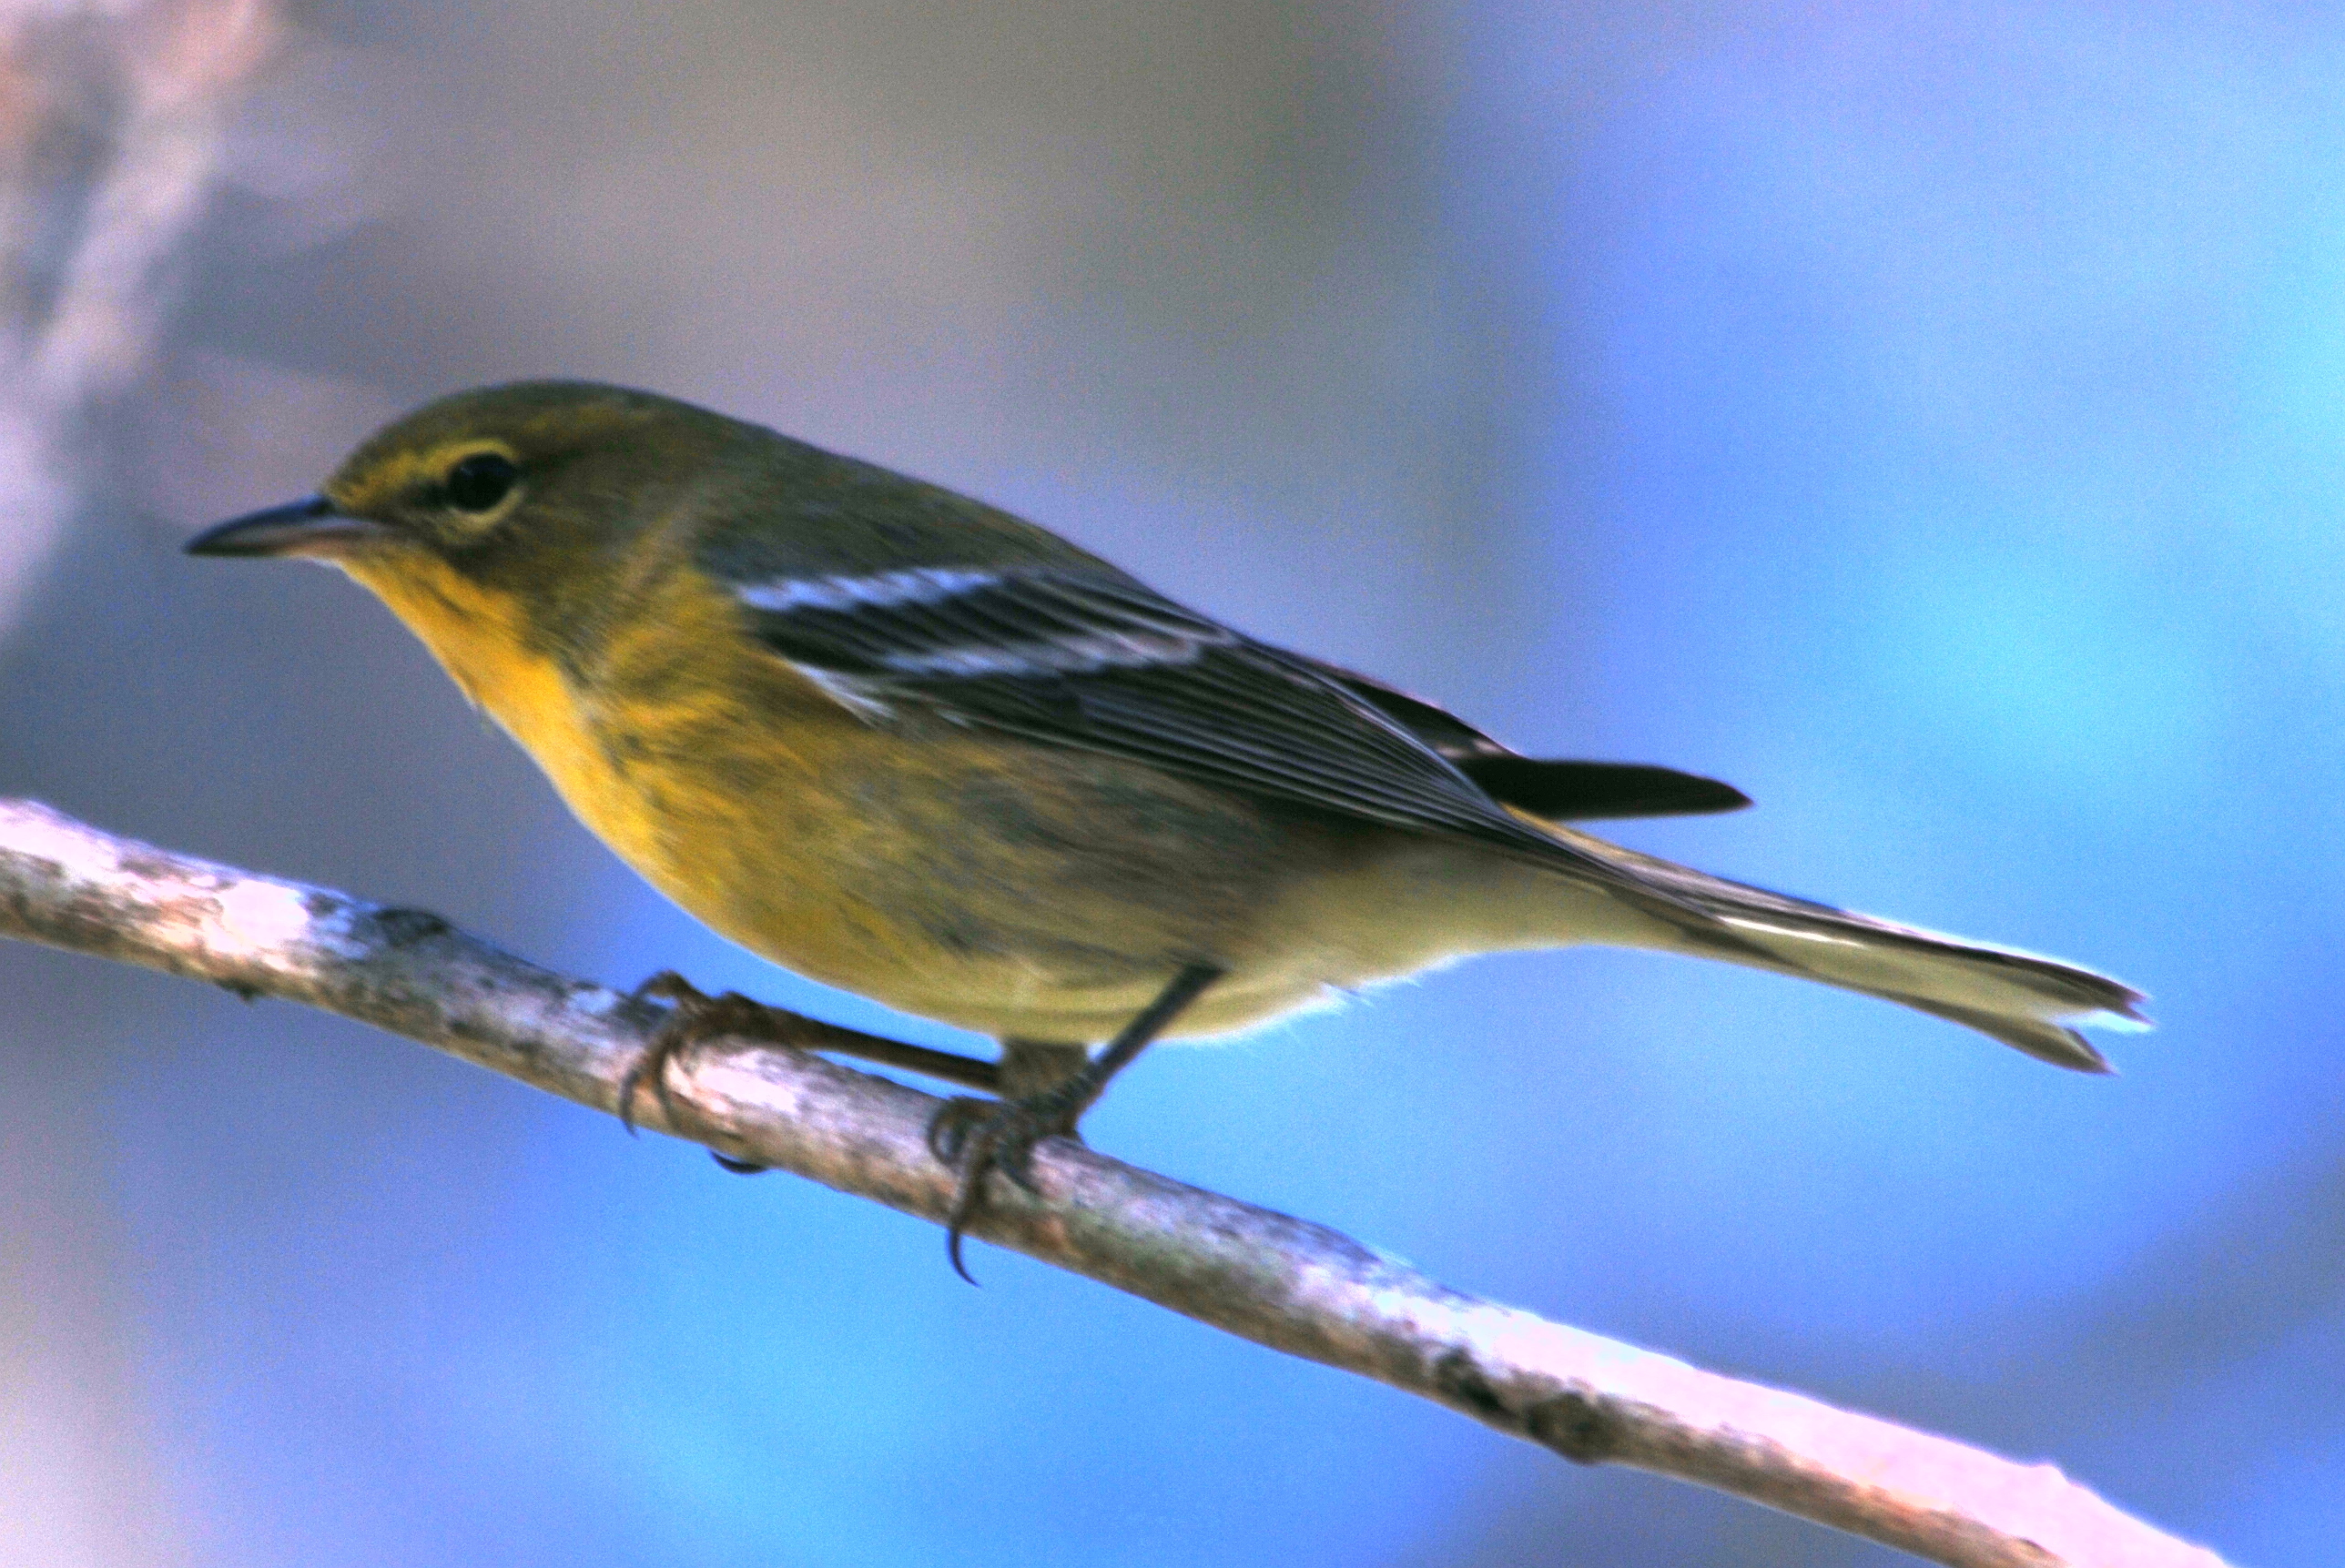 Click picture to see more Pine Warblers.